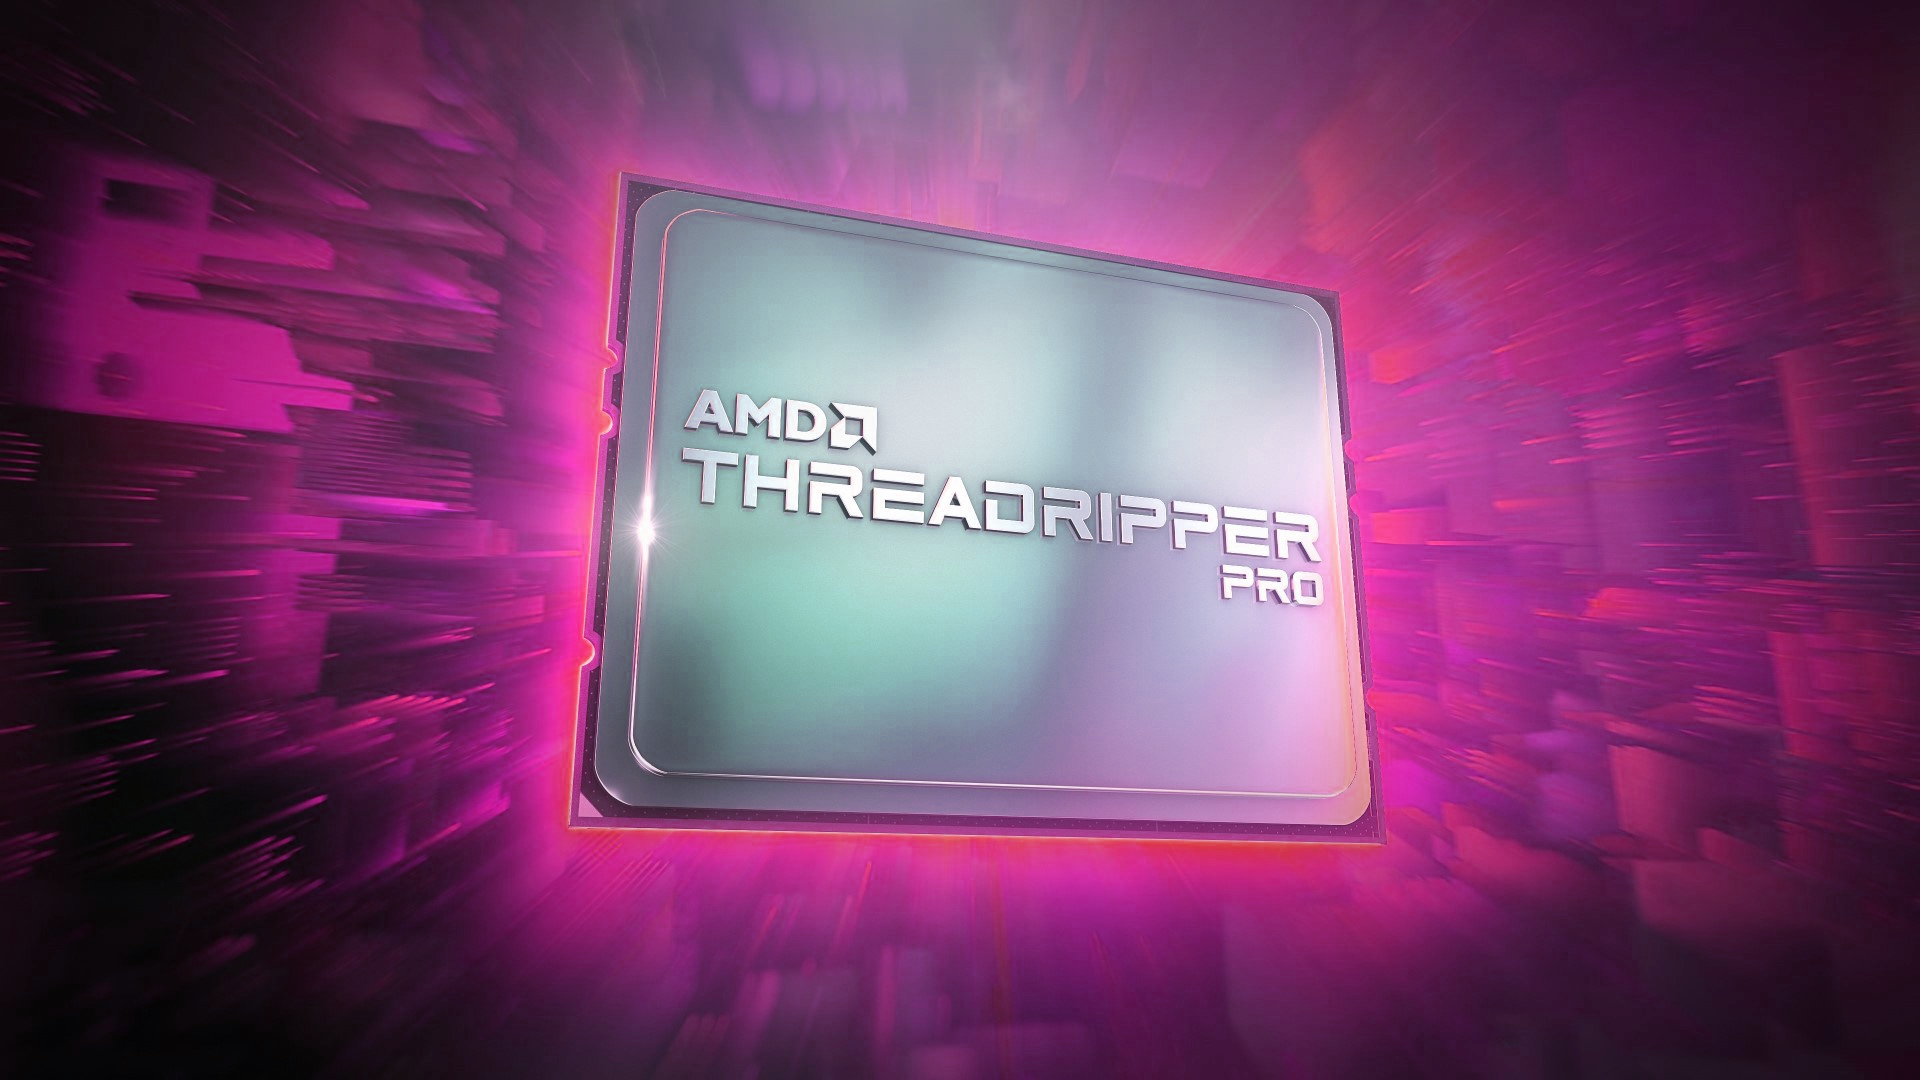 AMD’s new Threadripper PRO 7000 CPUs launching this month with insane core counts!